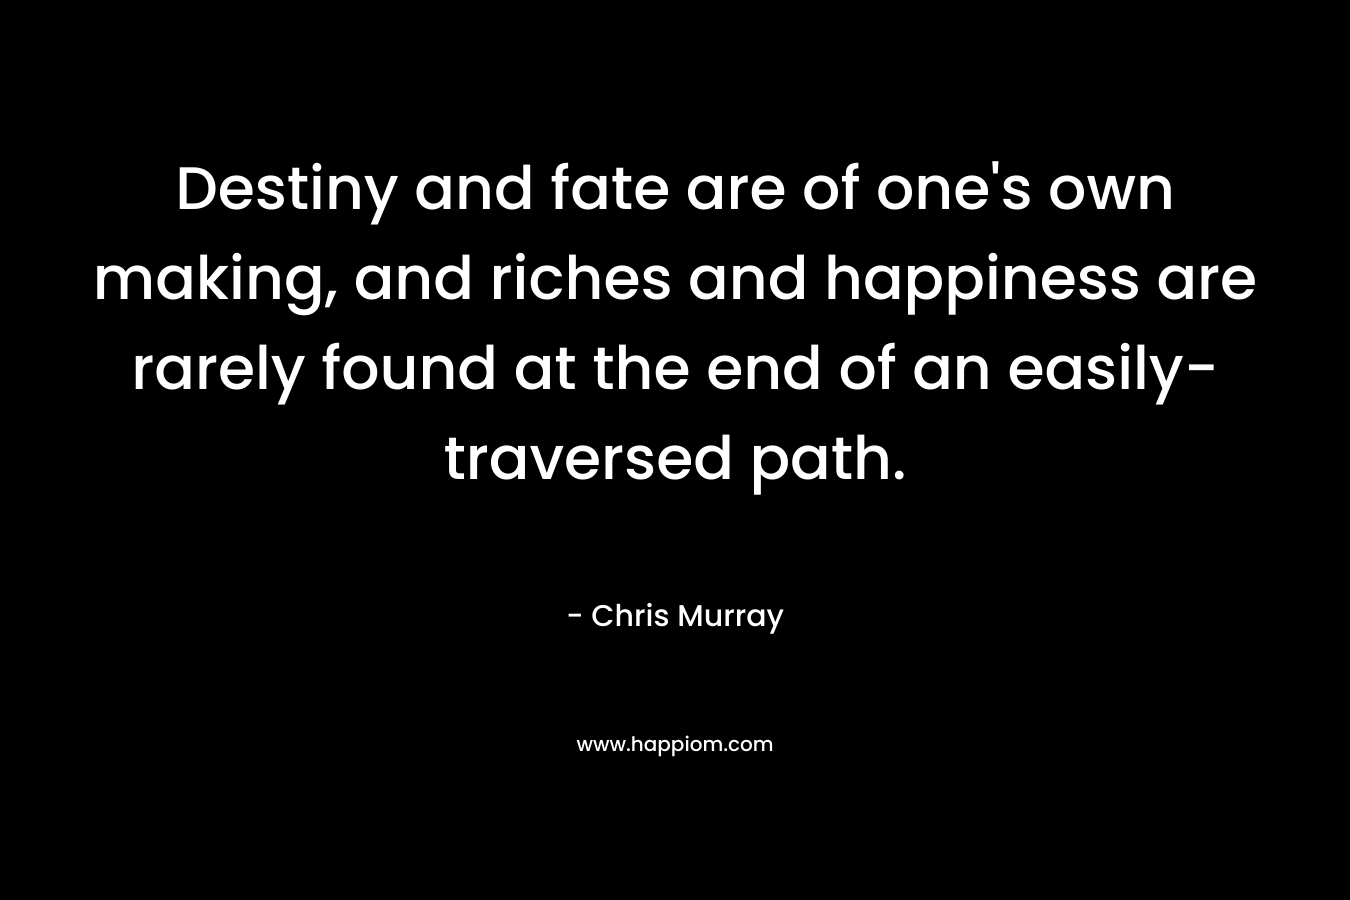 Destiny and fate are of one's own making, and riches and happiness are rarely found at the end of an easily-traversed path.